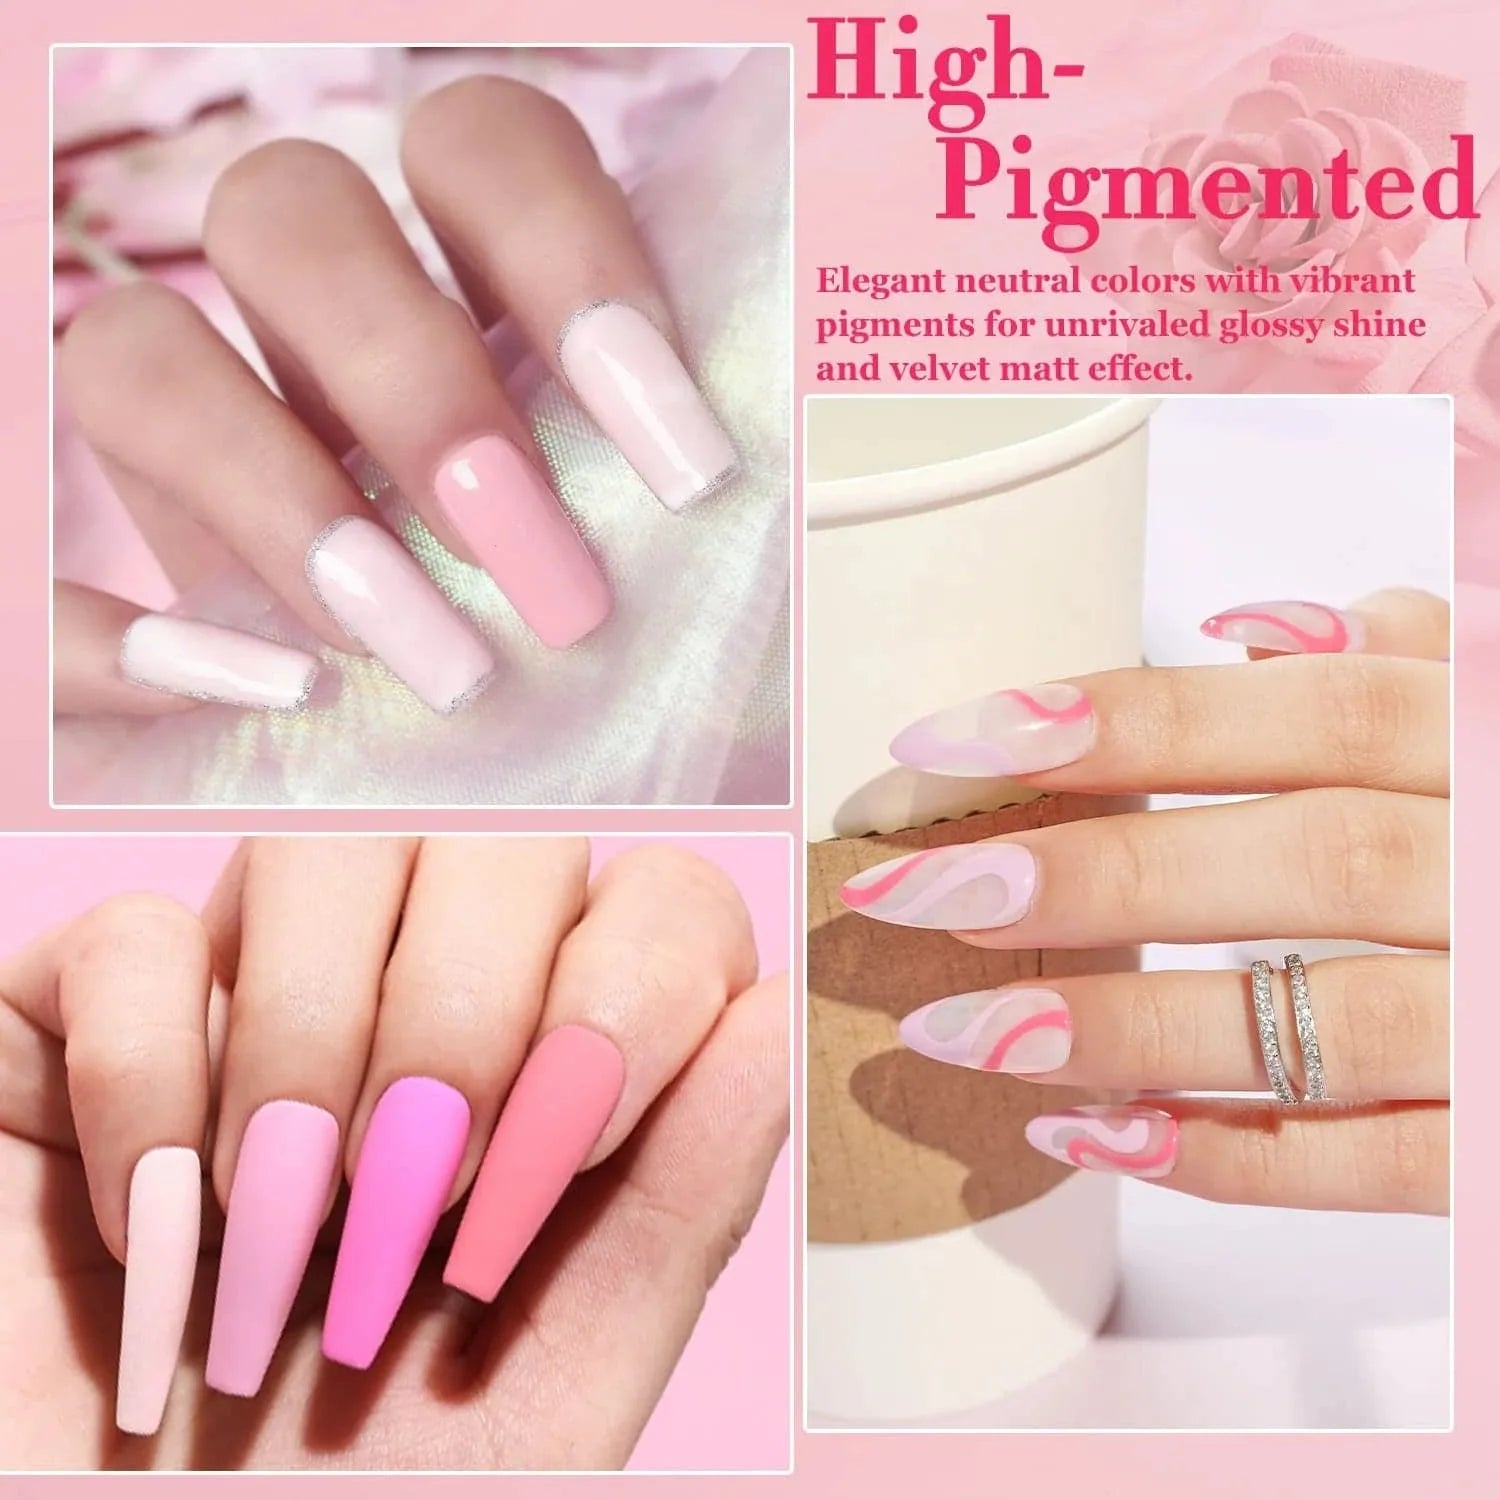 All About Pink - 6 Colors Gel Nail Polish Kit【US ONLY】